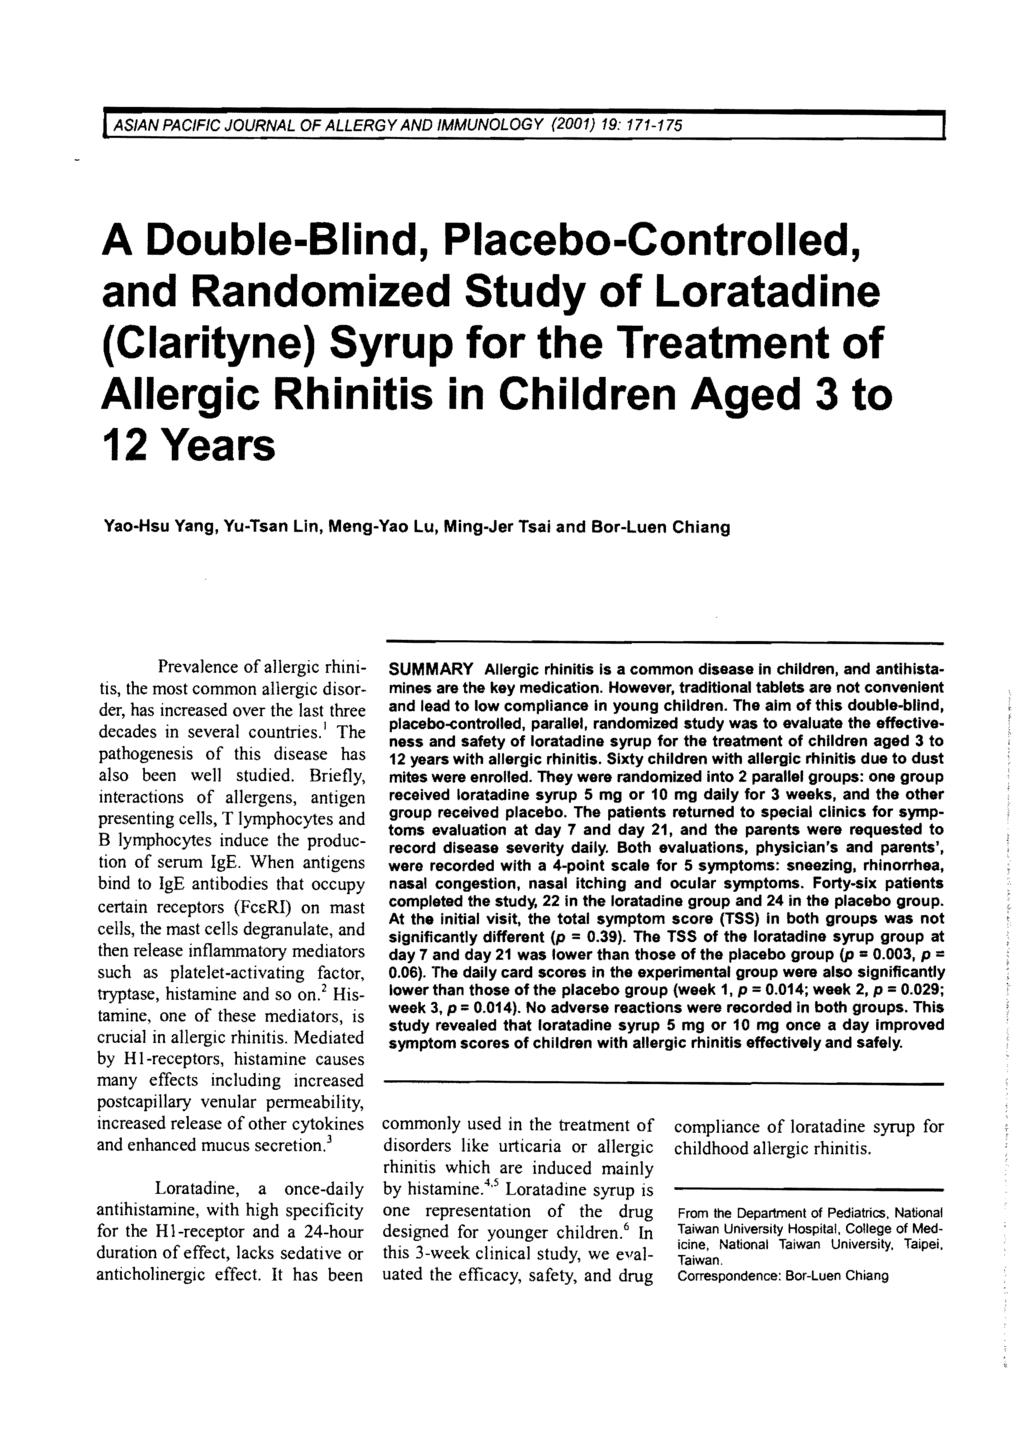 IASIAN PACIFIC JOURNAL OF ALLERGY AND IMMUNOLOGY (2001) 19: 171-175 A Double-Blind, Placebo-Controlled, and Randomized Study of Loratadine (Clarityne) Syrup for the Treatment of Allergic Rhinitis in